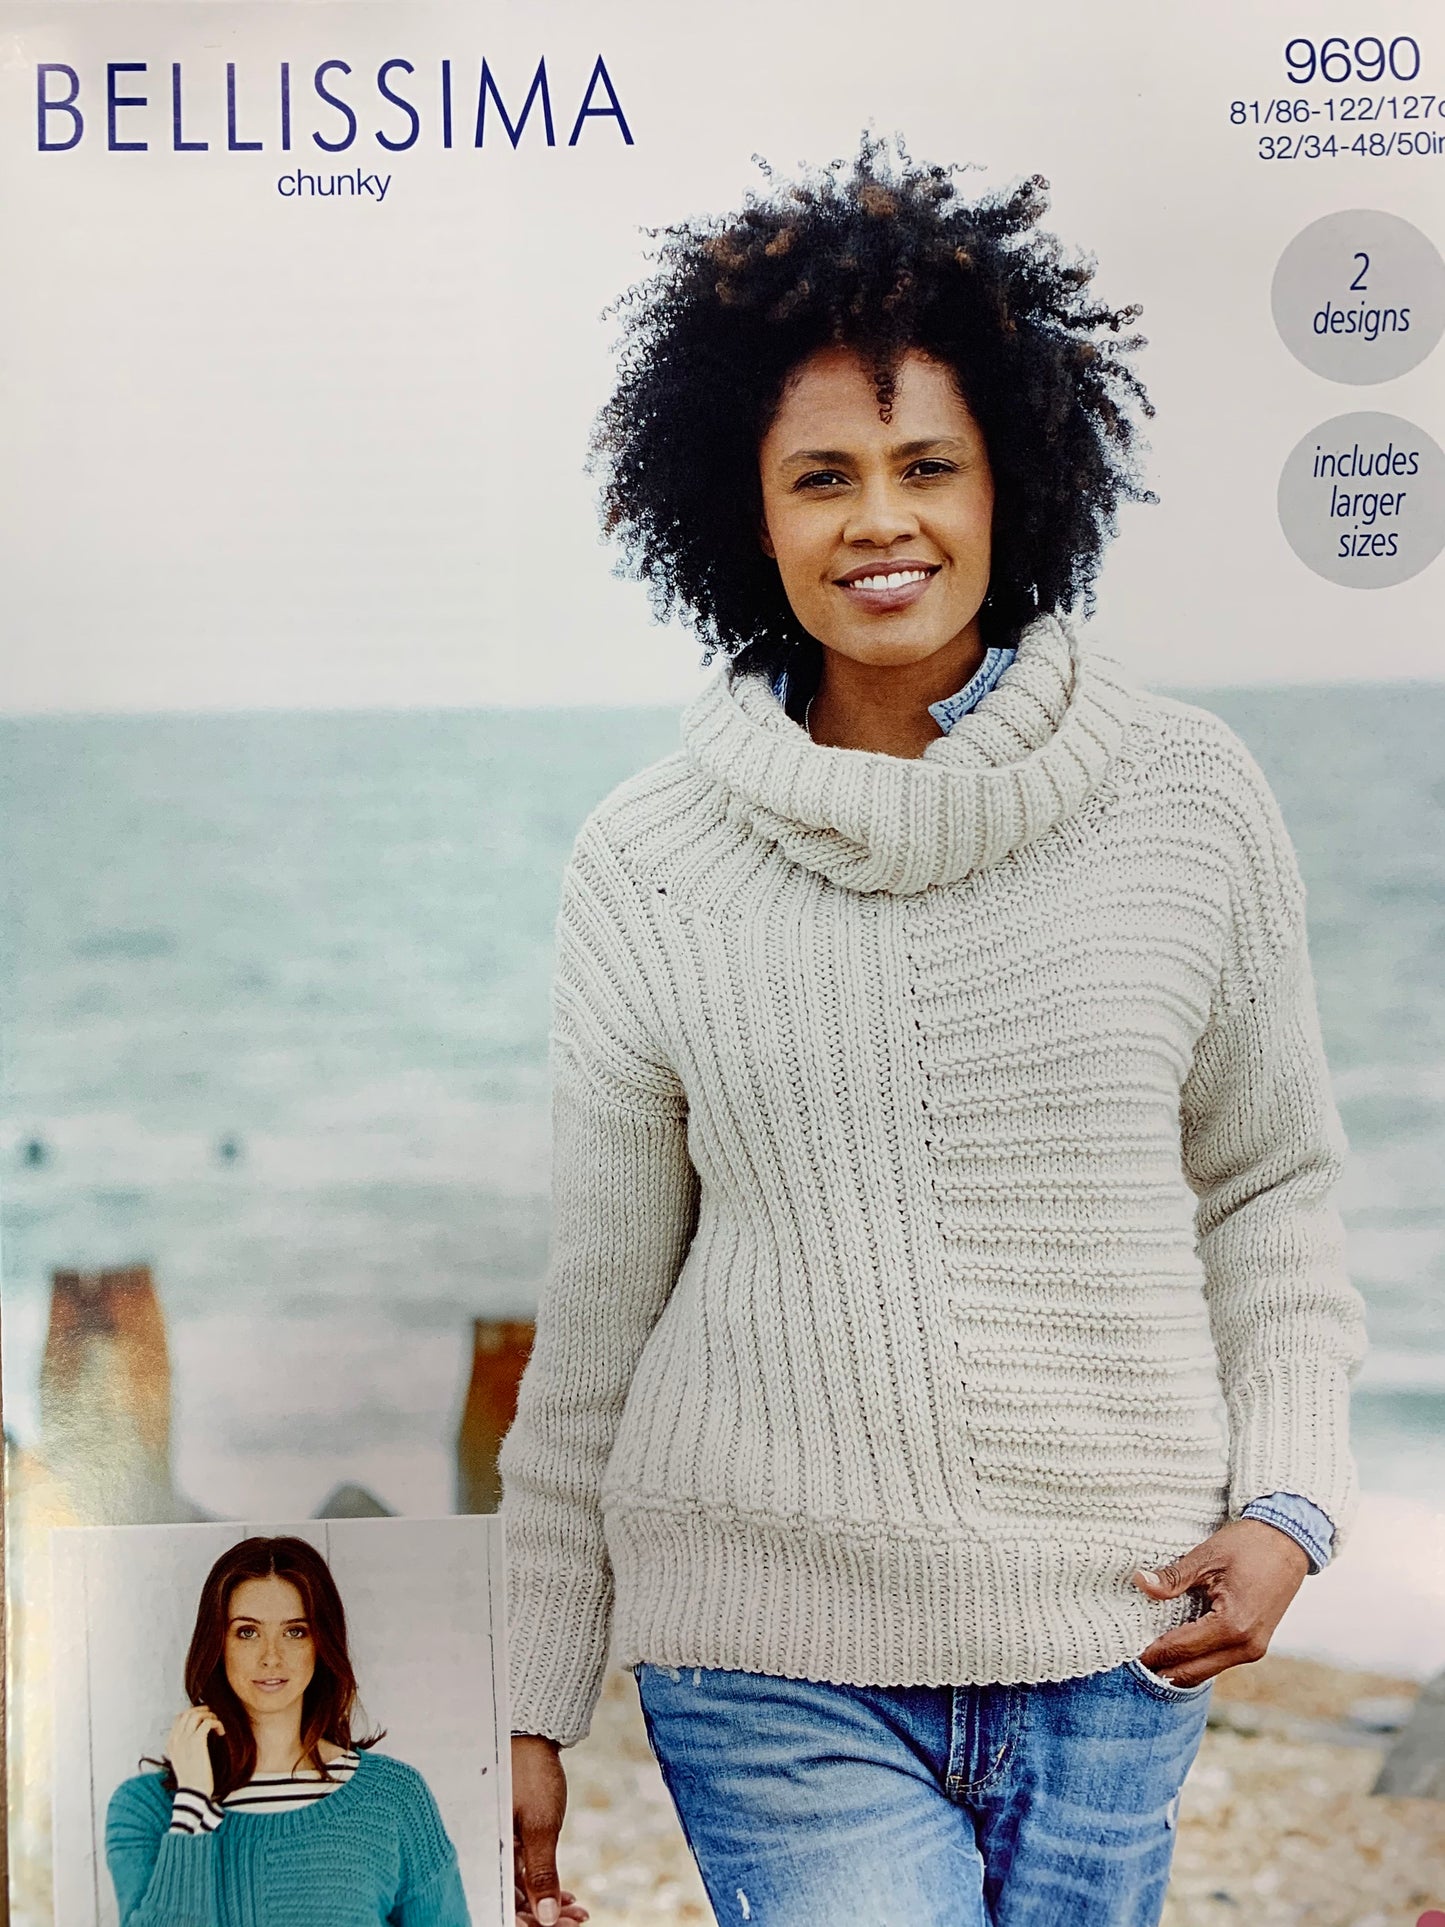 9690 Stylecraft Bellissima chunky ladies sweater round neck and rolled neck knitting pattern